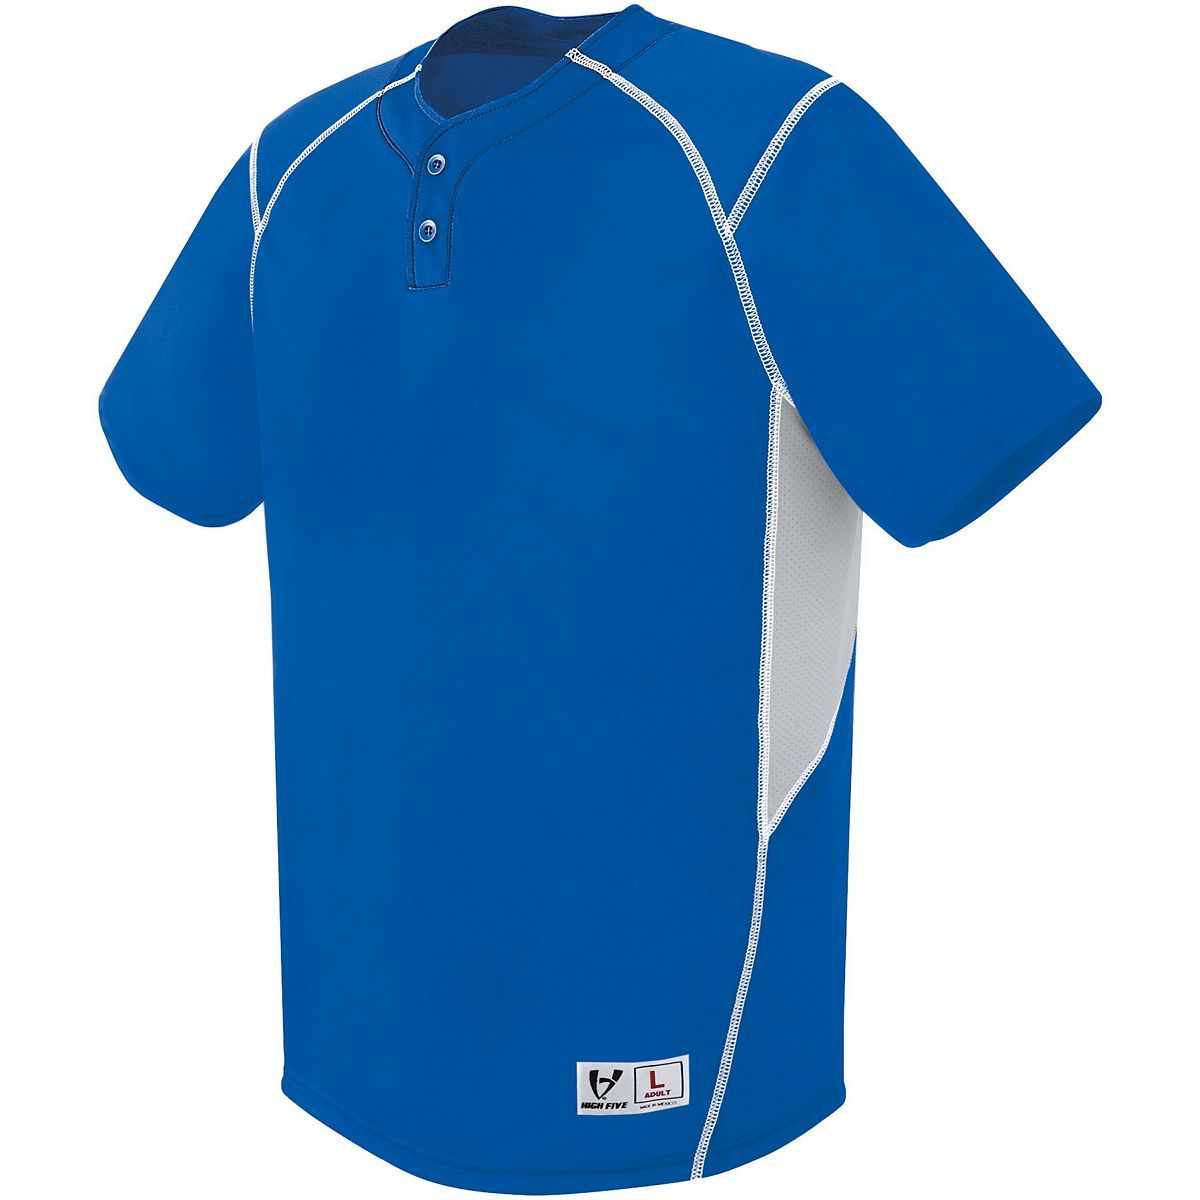 Augusta Sportswear Bandit Two-Button Jersey in Royal/Silver Grey/White  -Part of the Adult, Adult-Jersey, Augusta-Products, Baseball, Shirts, All-Sports, All-Sports-1 product lines at KanaleyCreations.com